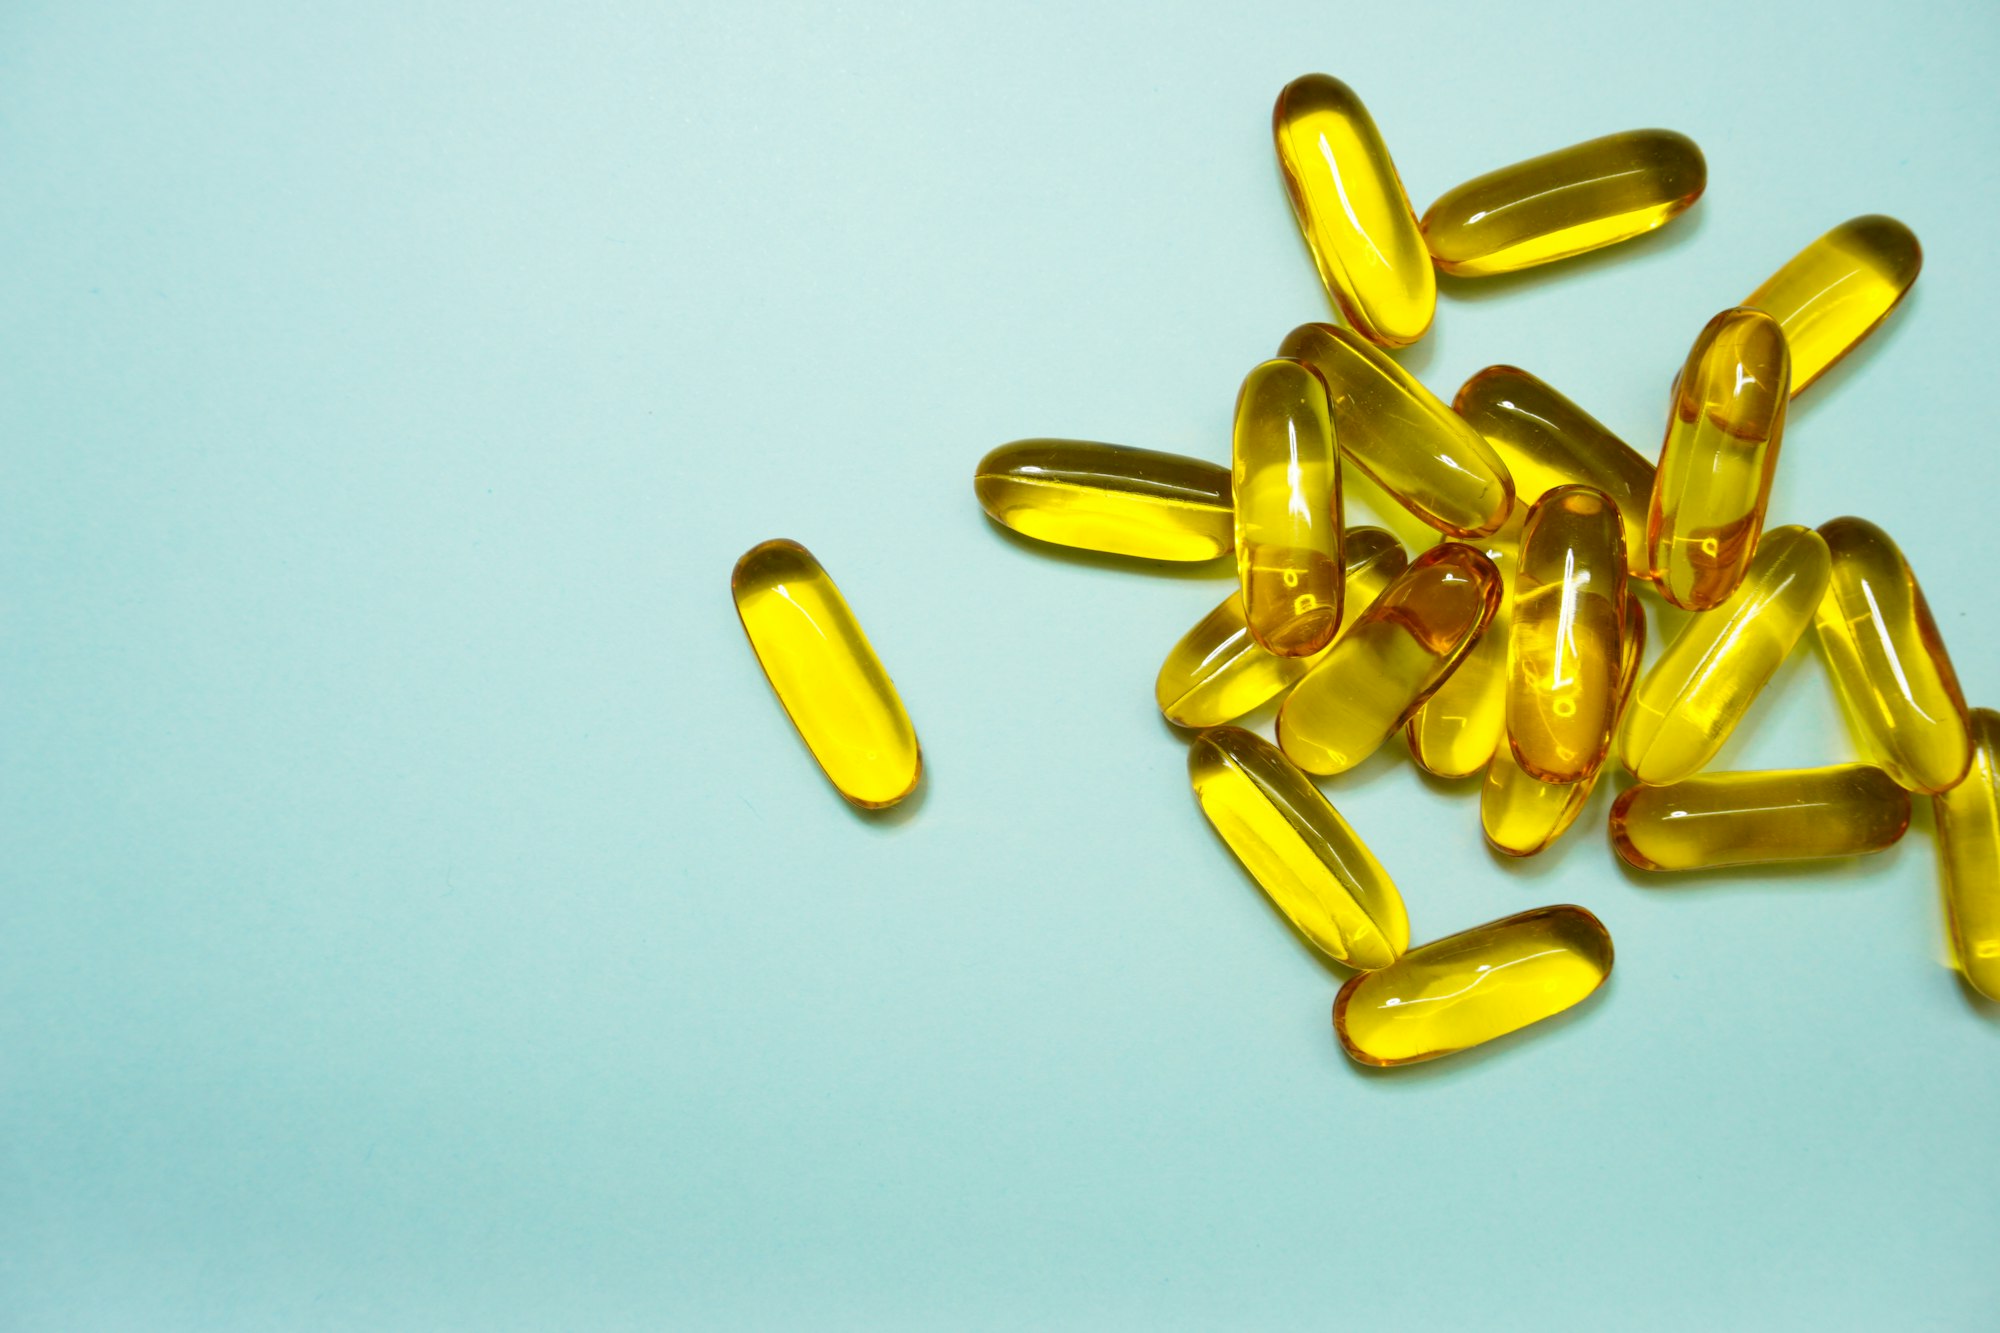 Omega-3 Is Important For Low Levels Of Inflammation